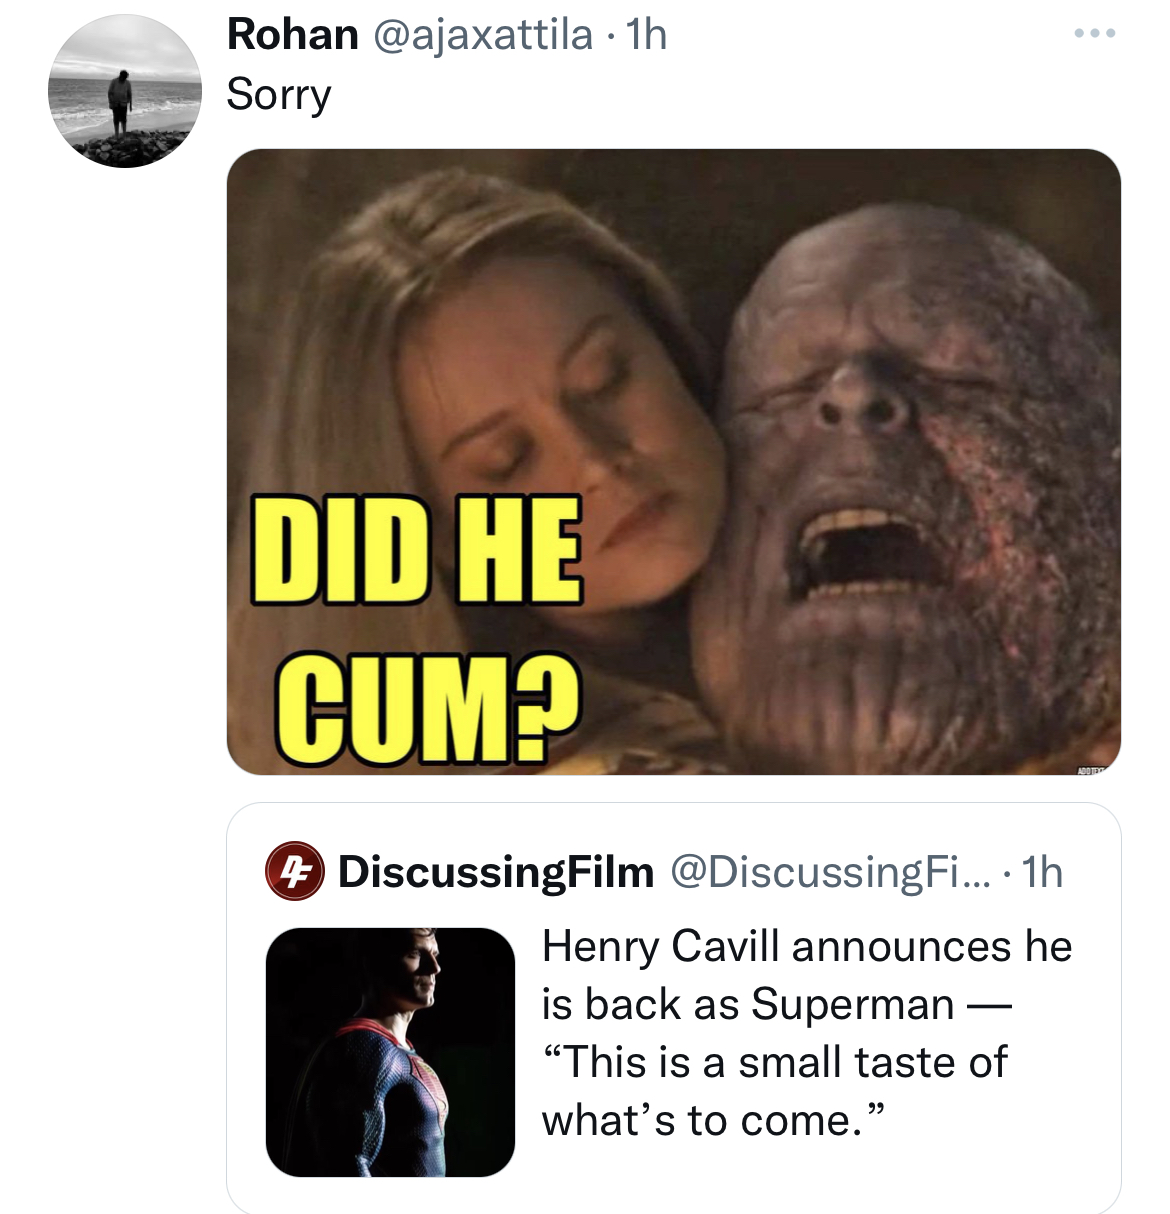 tweets roasting celebs - jaw - Rohan . 1h Sorry Did He Cum? DiscussingFilm ....1h Henry Cavill announces he is back as Superman "This is a small taste of what's to come."